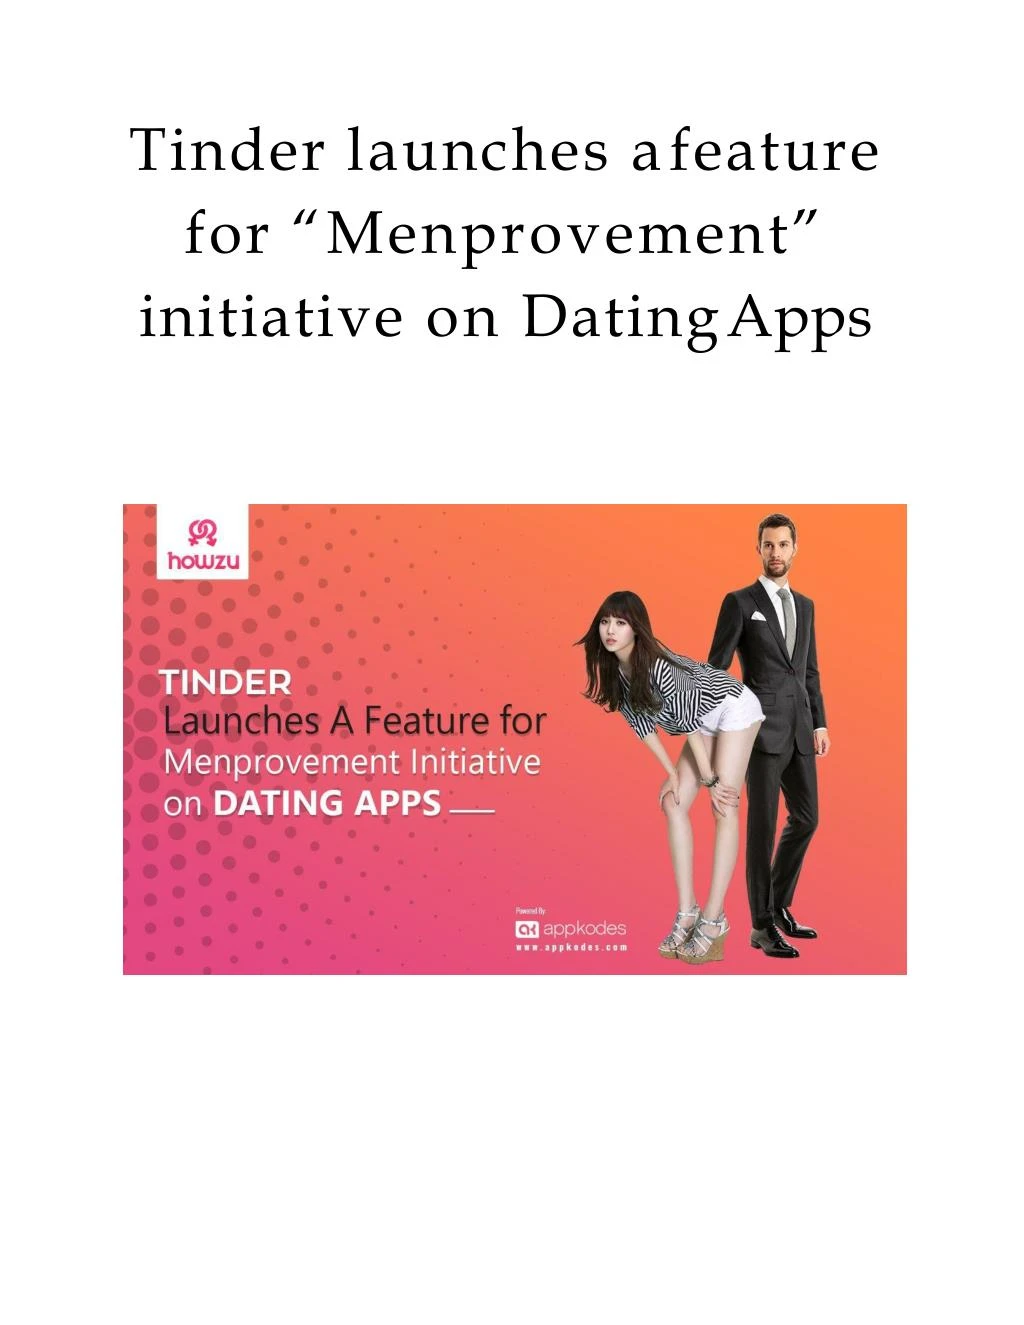 tinder launches a feature for menprovement initiative on dating apps